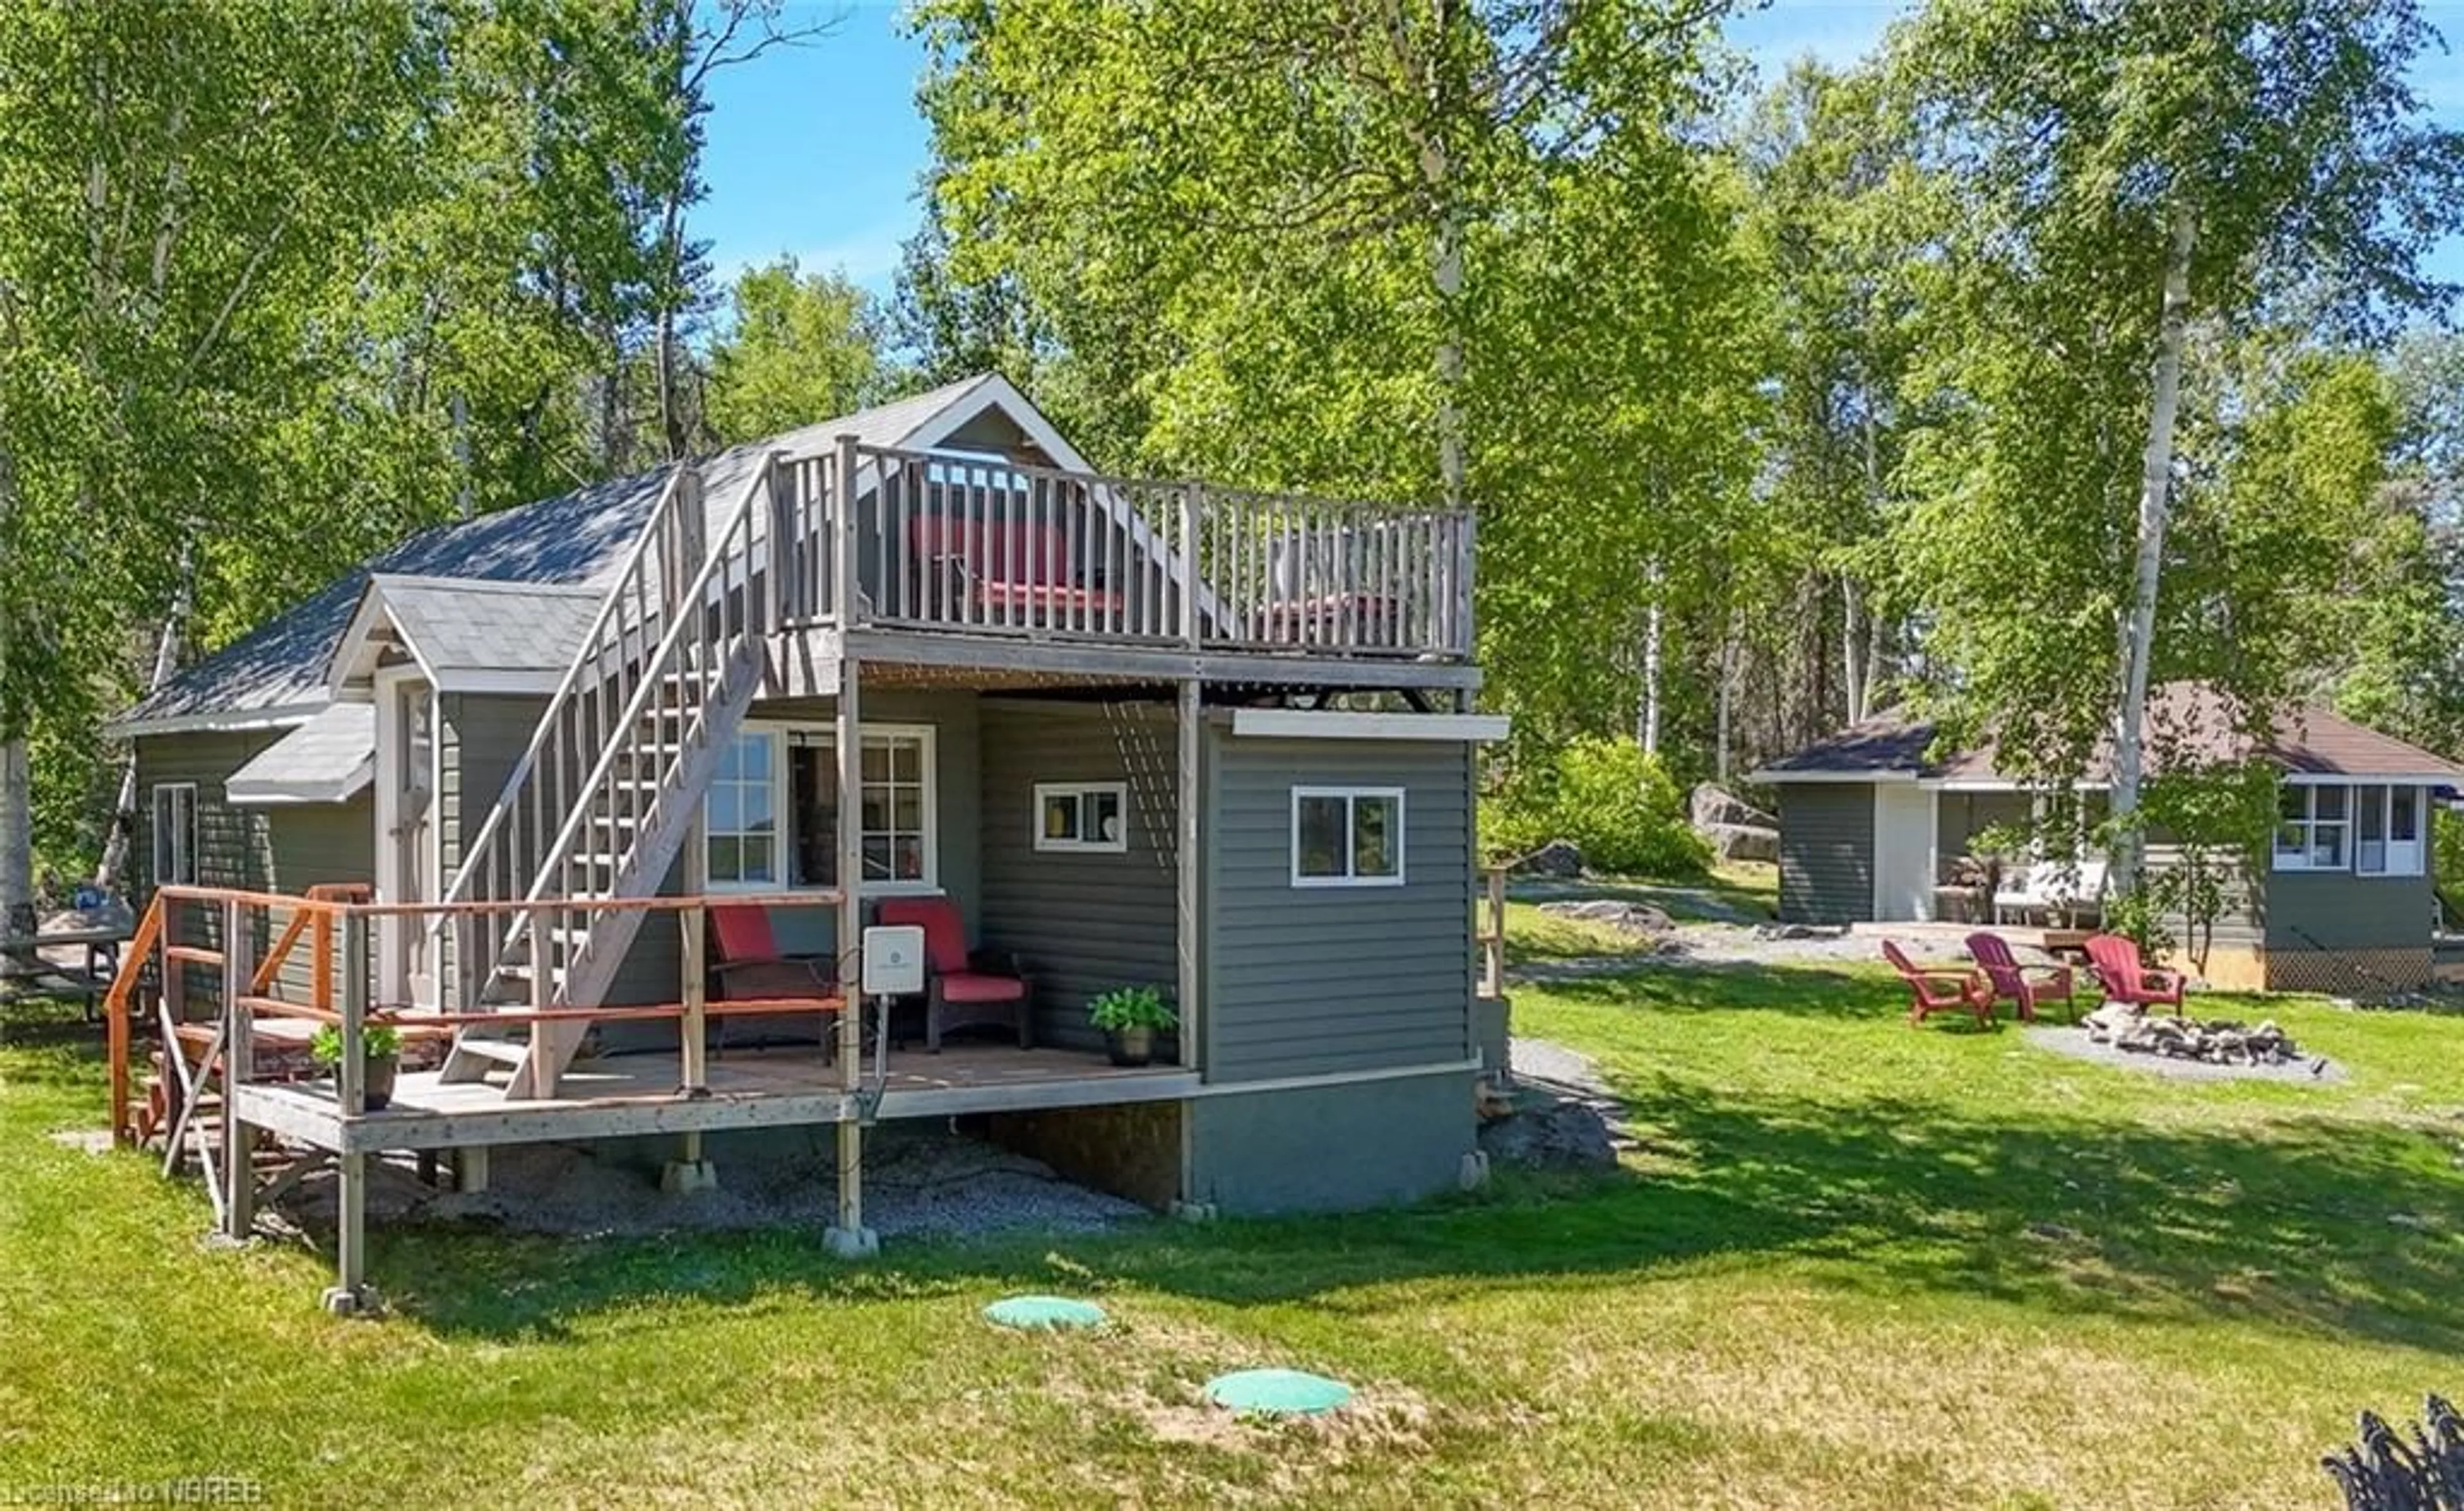 Cottage for 9770 Hwy 11, Latchford Ontario P0J 1N0